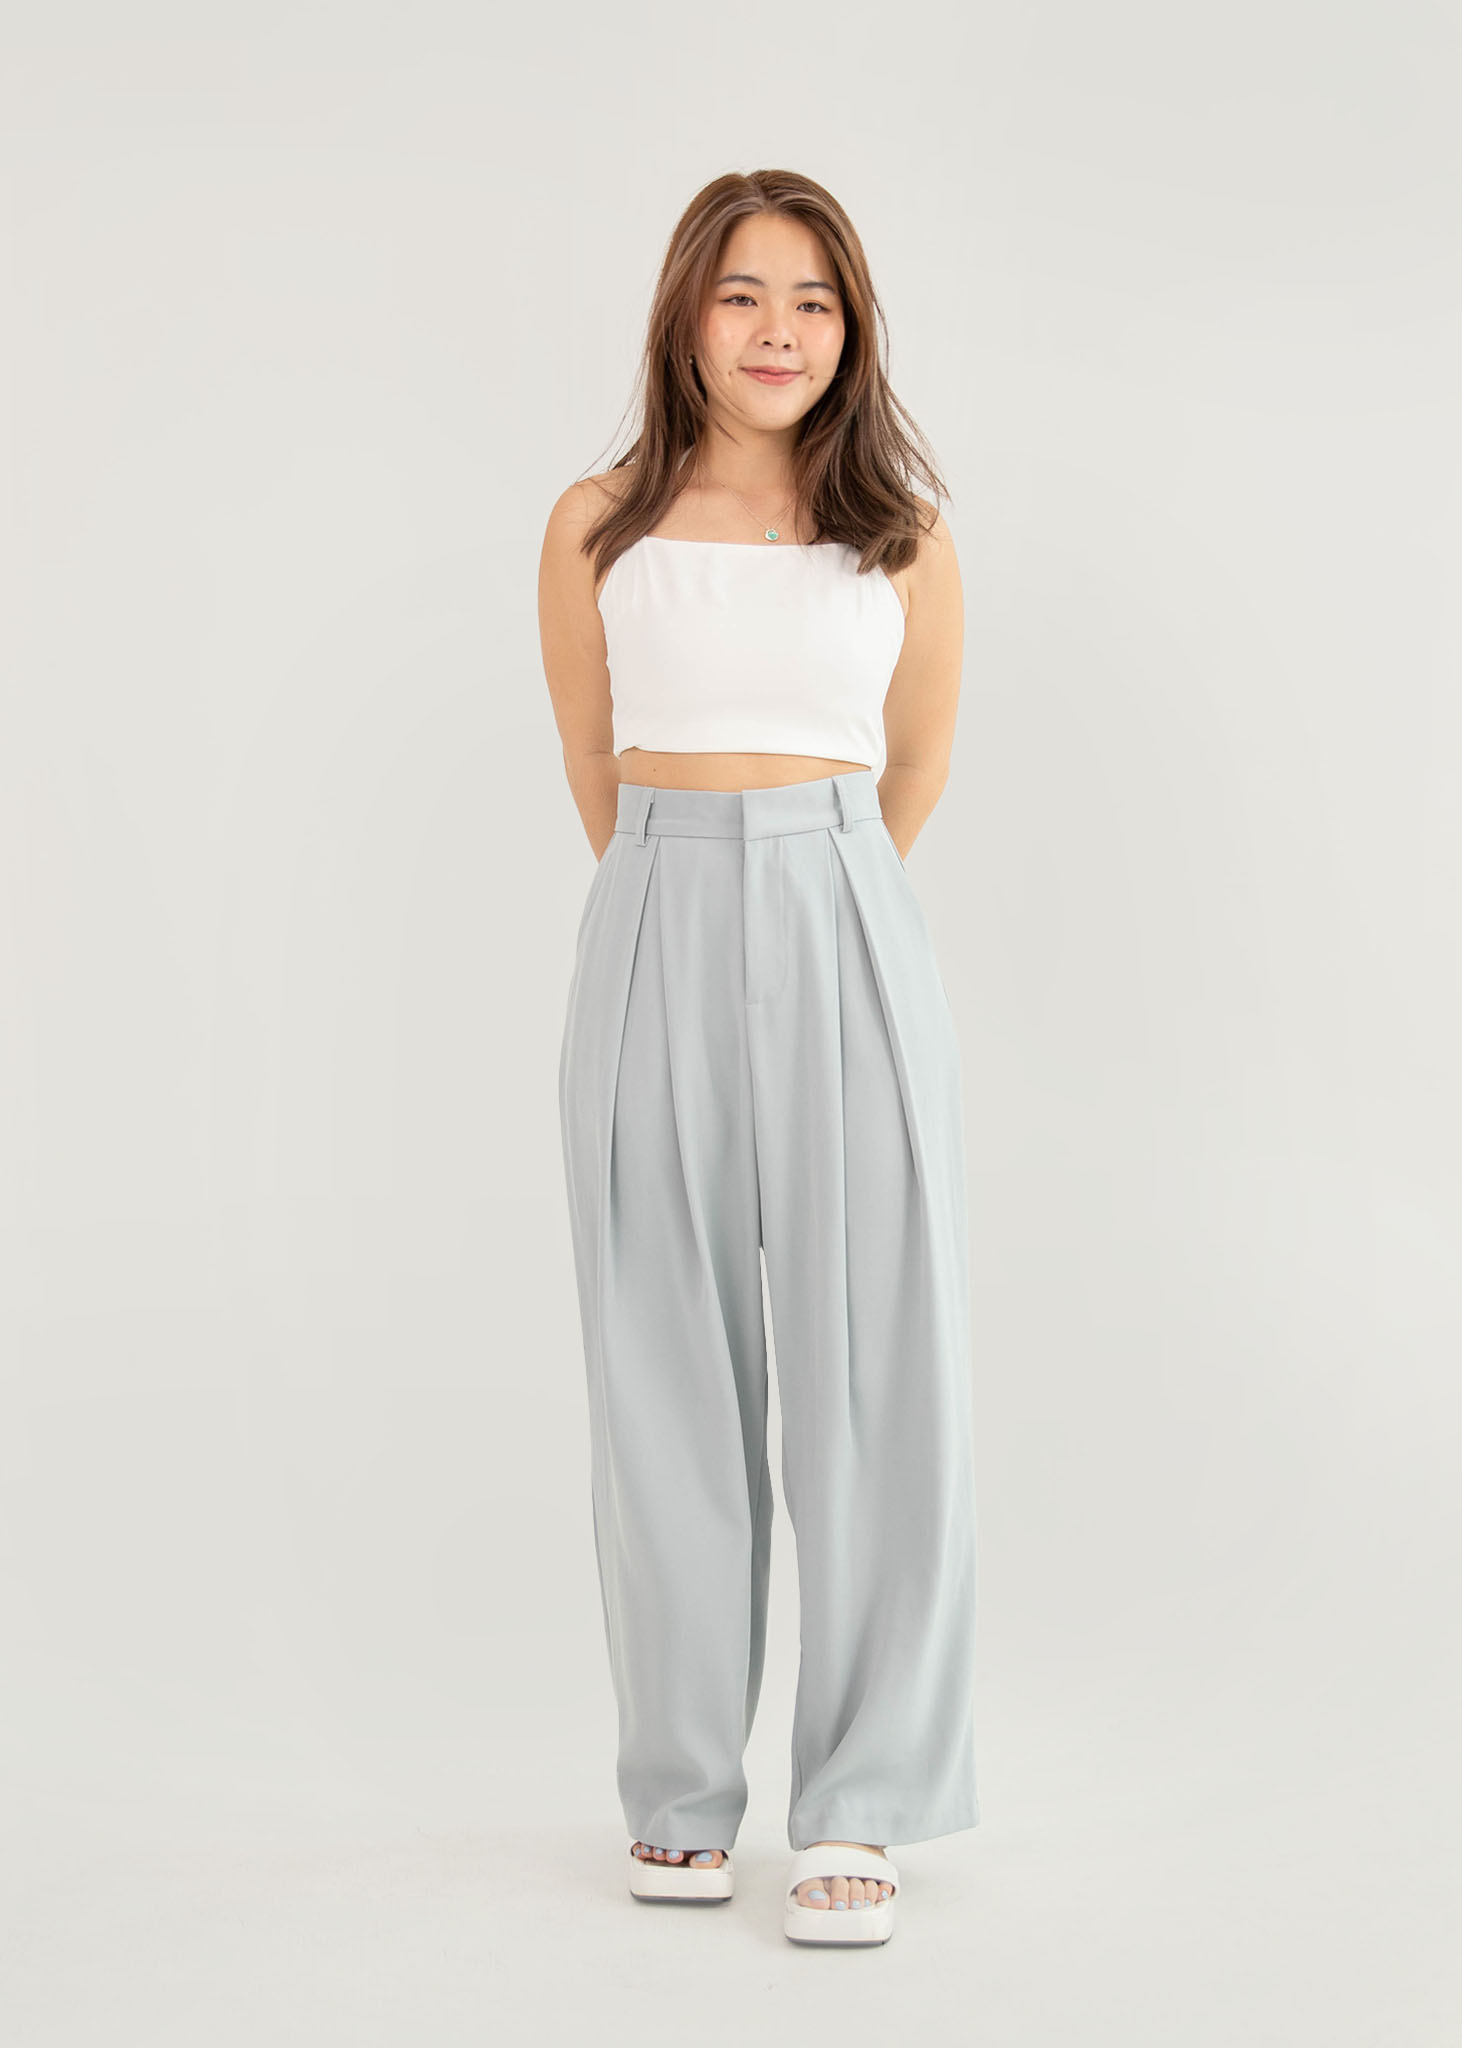 Voyage Flare Pants in White #6stylexclusive